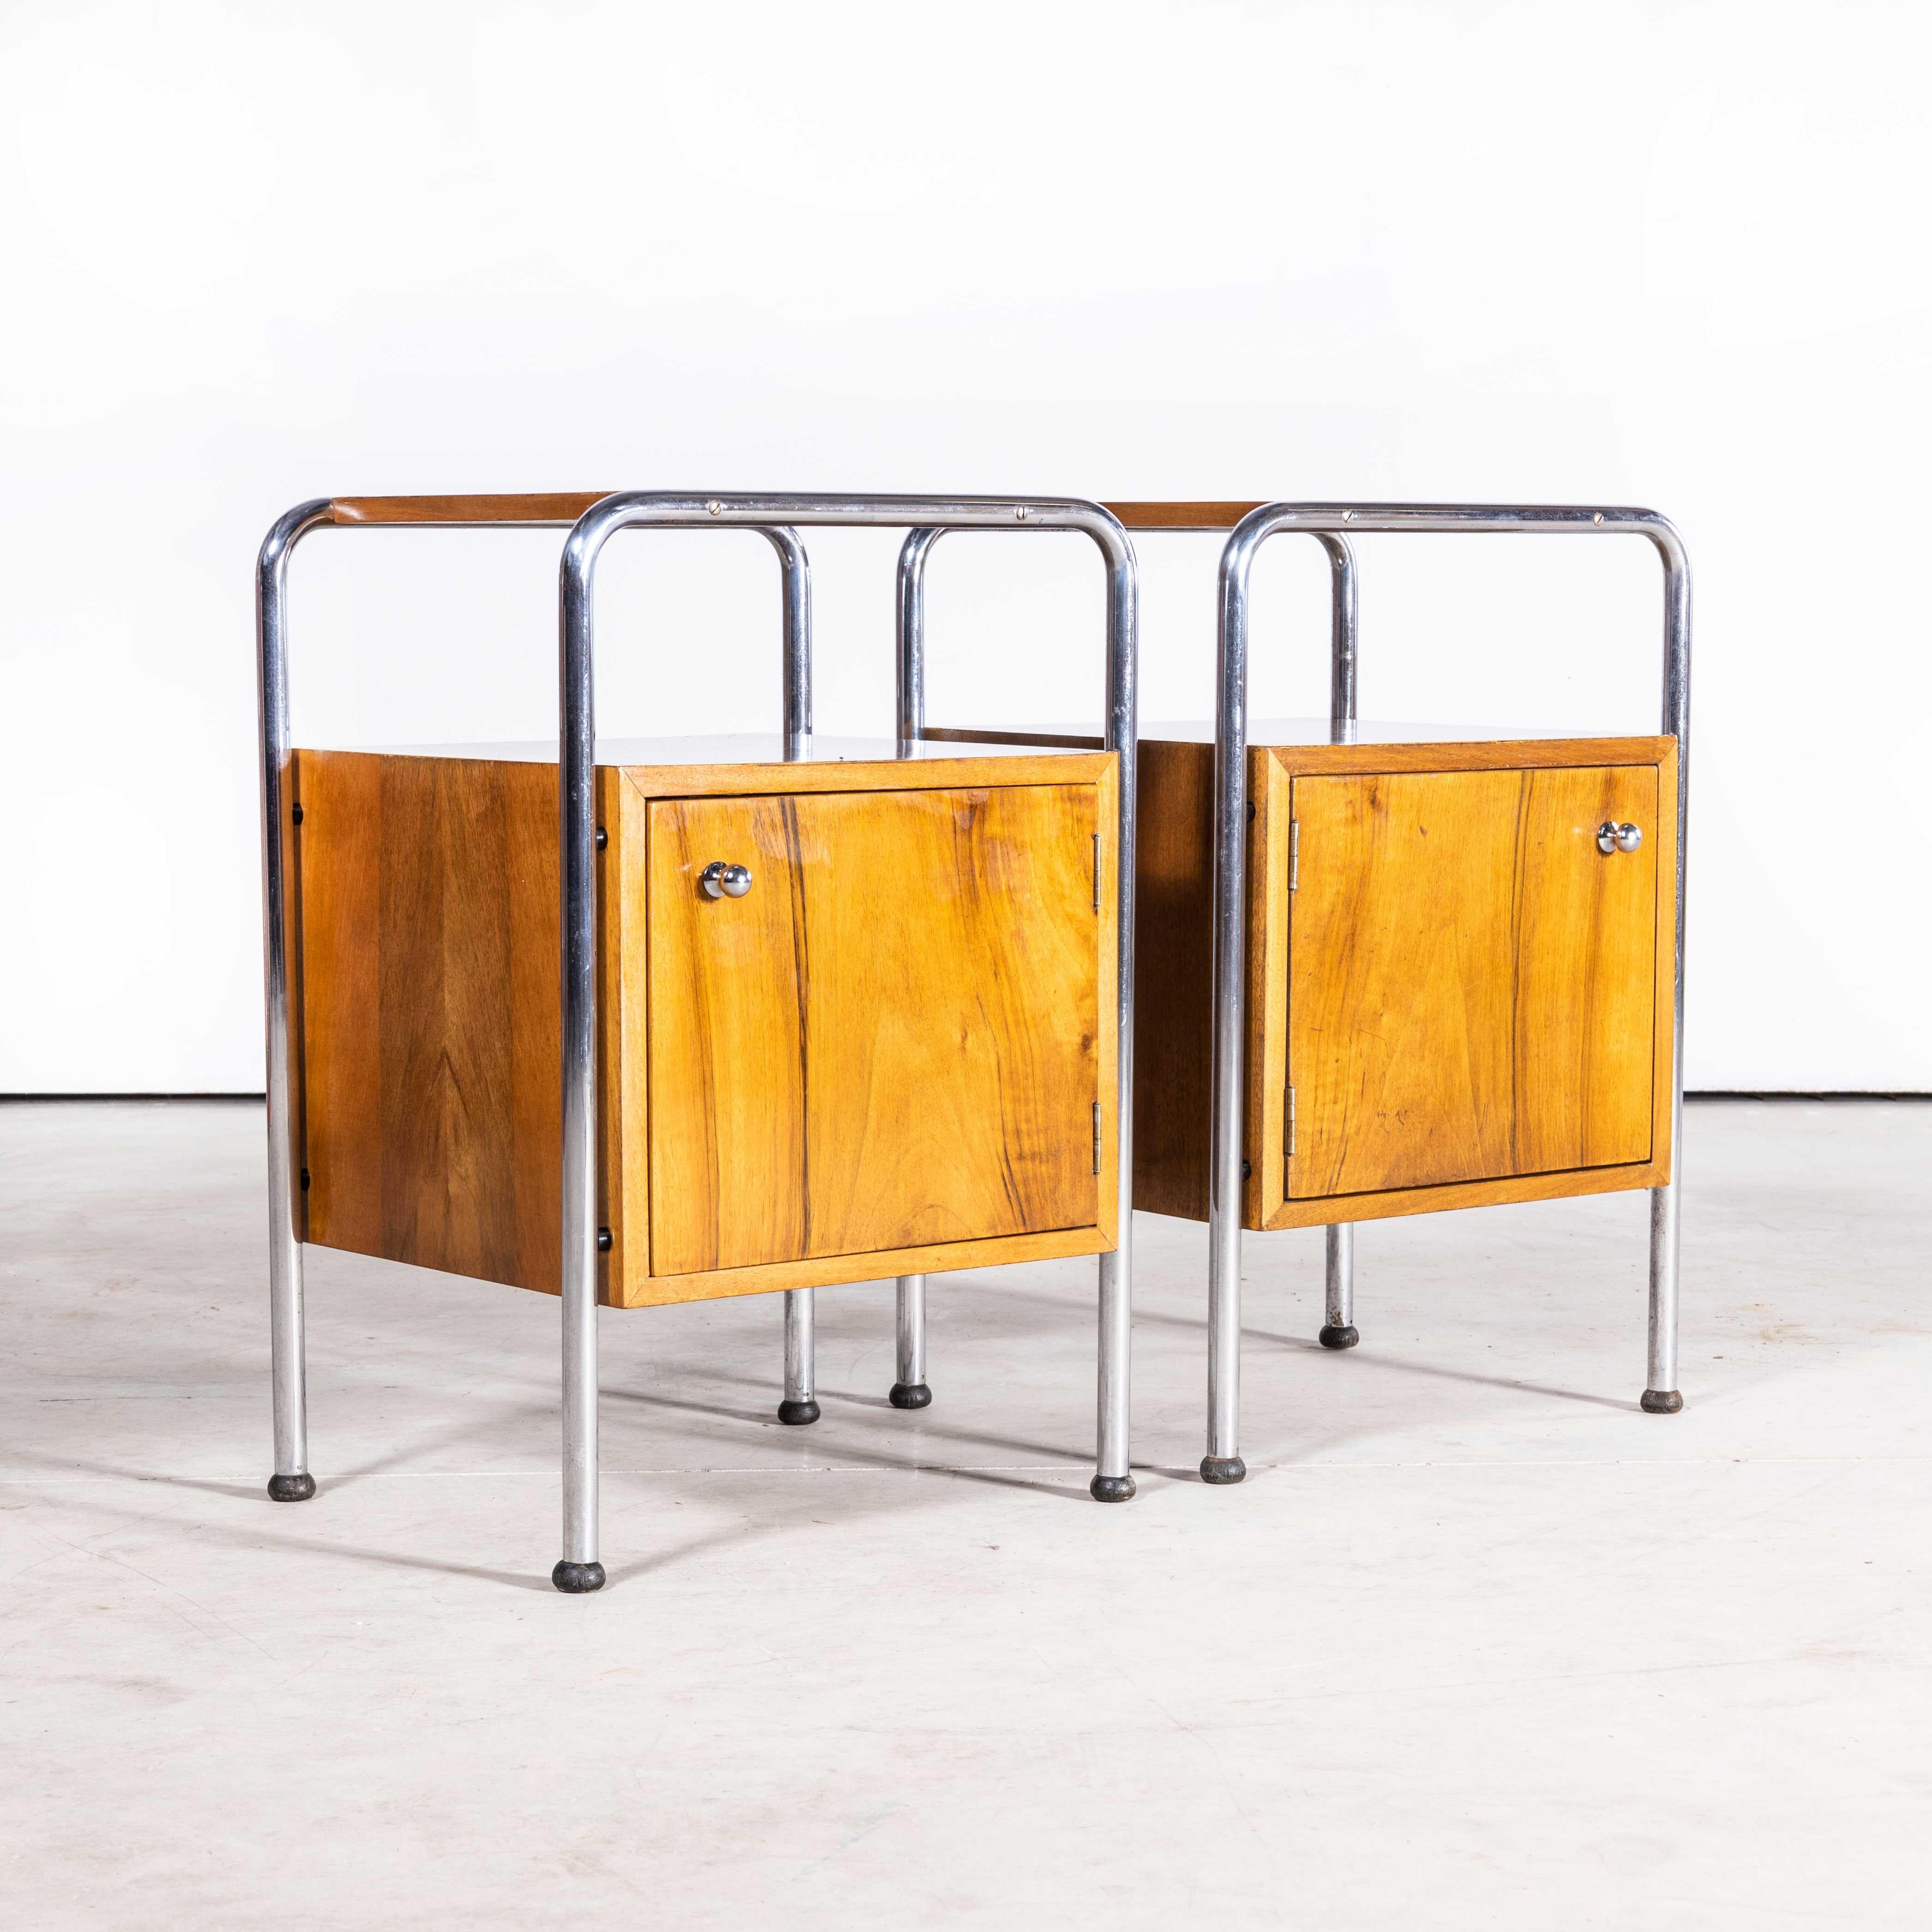 1960s Chrome and Birch Bedside Cabinets, Pair For Sale 1